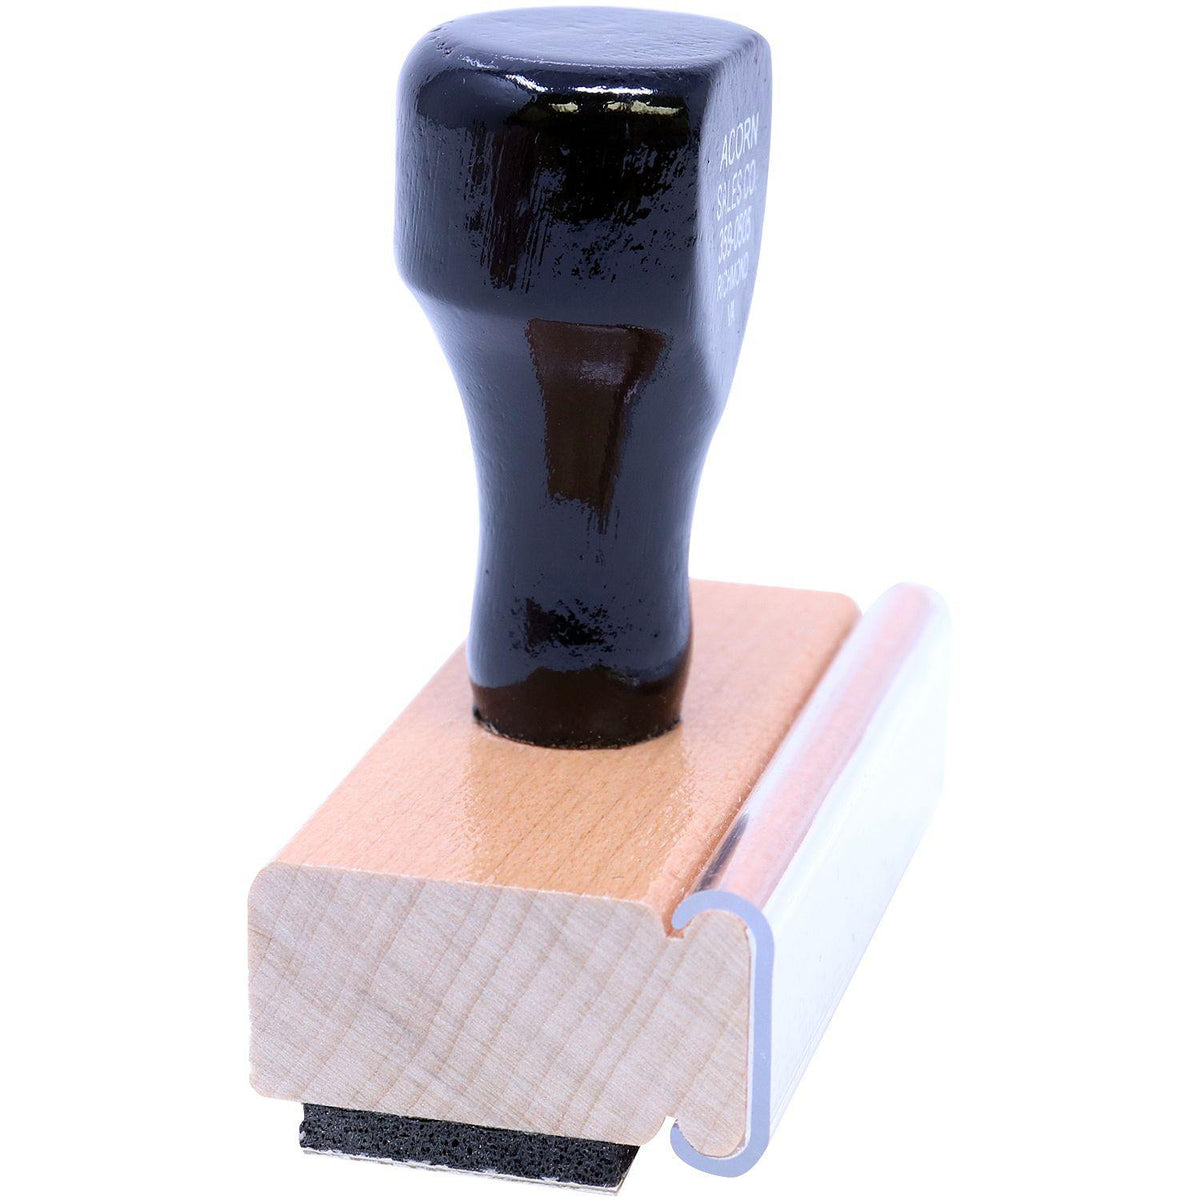 Side View of Large Revised Rubber Stamp at an Angle